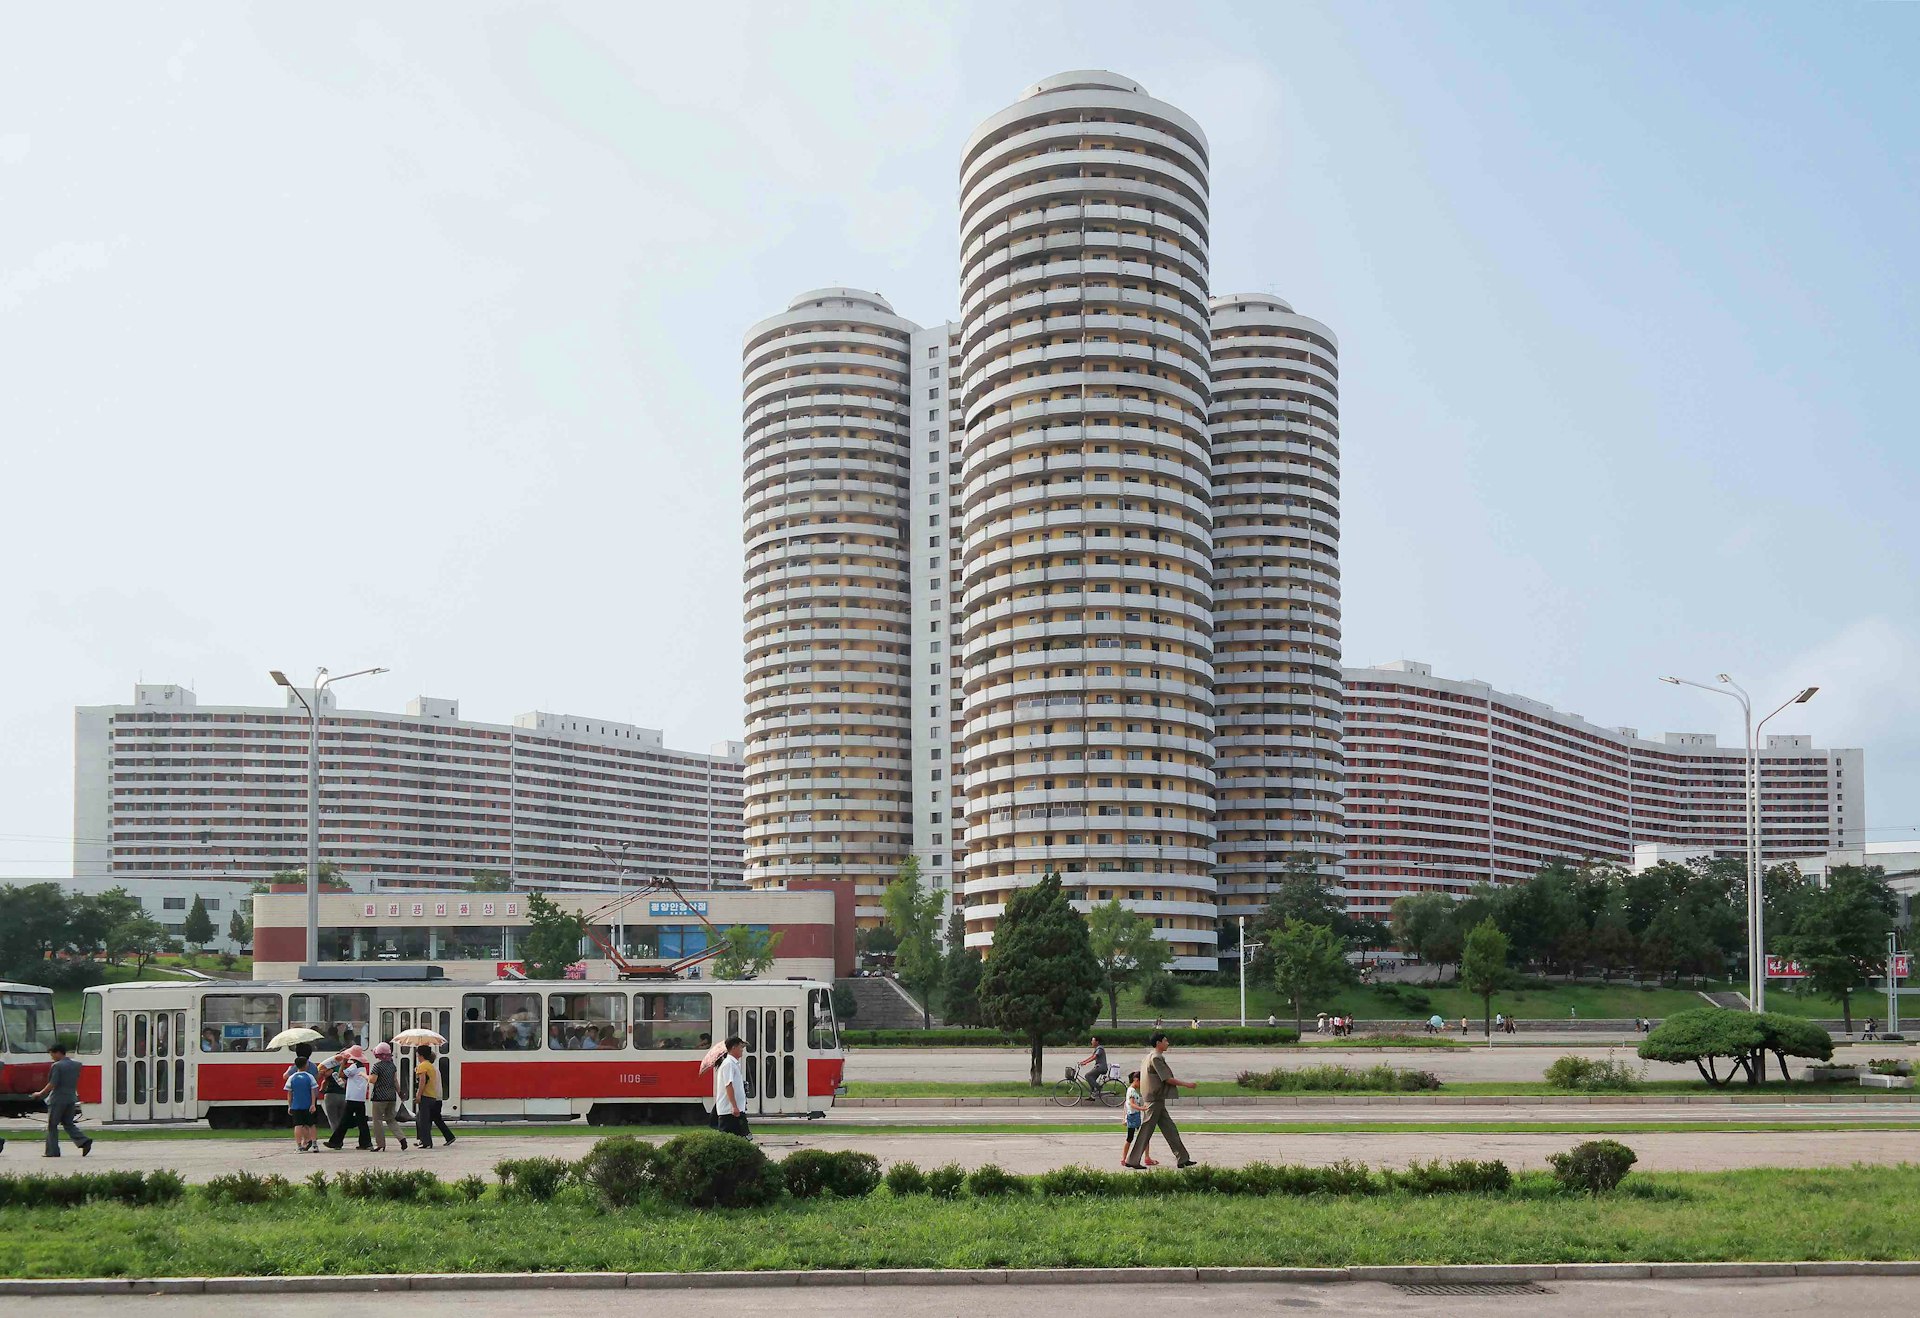 Cylindrical apartment towers for the Pyongyang elite line down the 4km- long avenue of Kwangbok Street, a ceremonial boulevard built for the 1989 World Festival of Youth and Students. As Kim Jong Il wrote approvingly: “In the formation of Kwangbok Street, a large variety of shapes, such as cylinders, windmills, polygons, the letter S and steps, were adopted for apartment blocks. [...] The arrangement of buildings on straight lines along the main street is an outmoded method.”